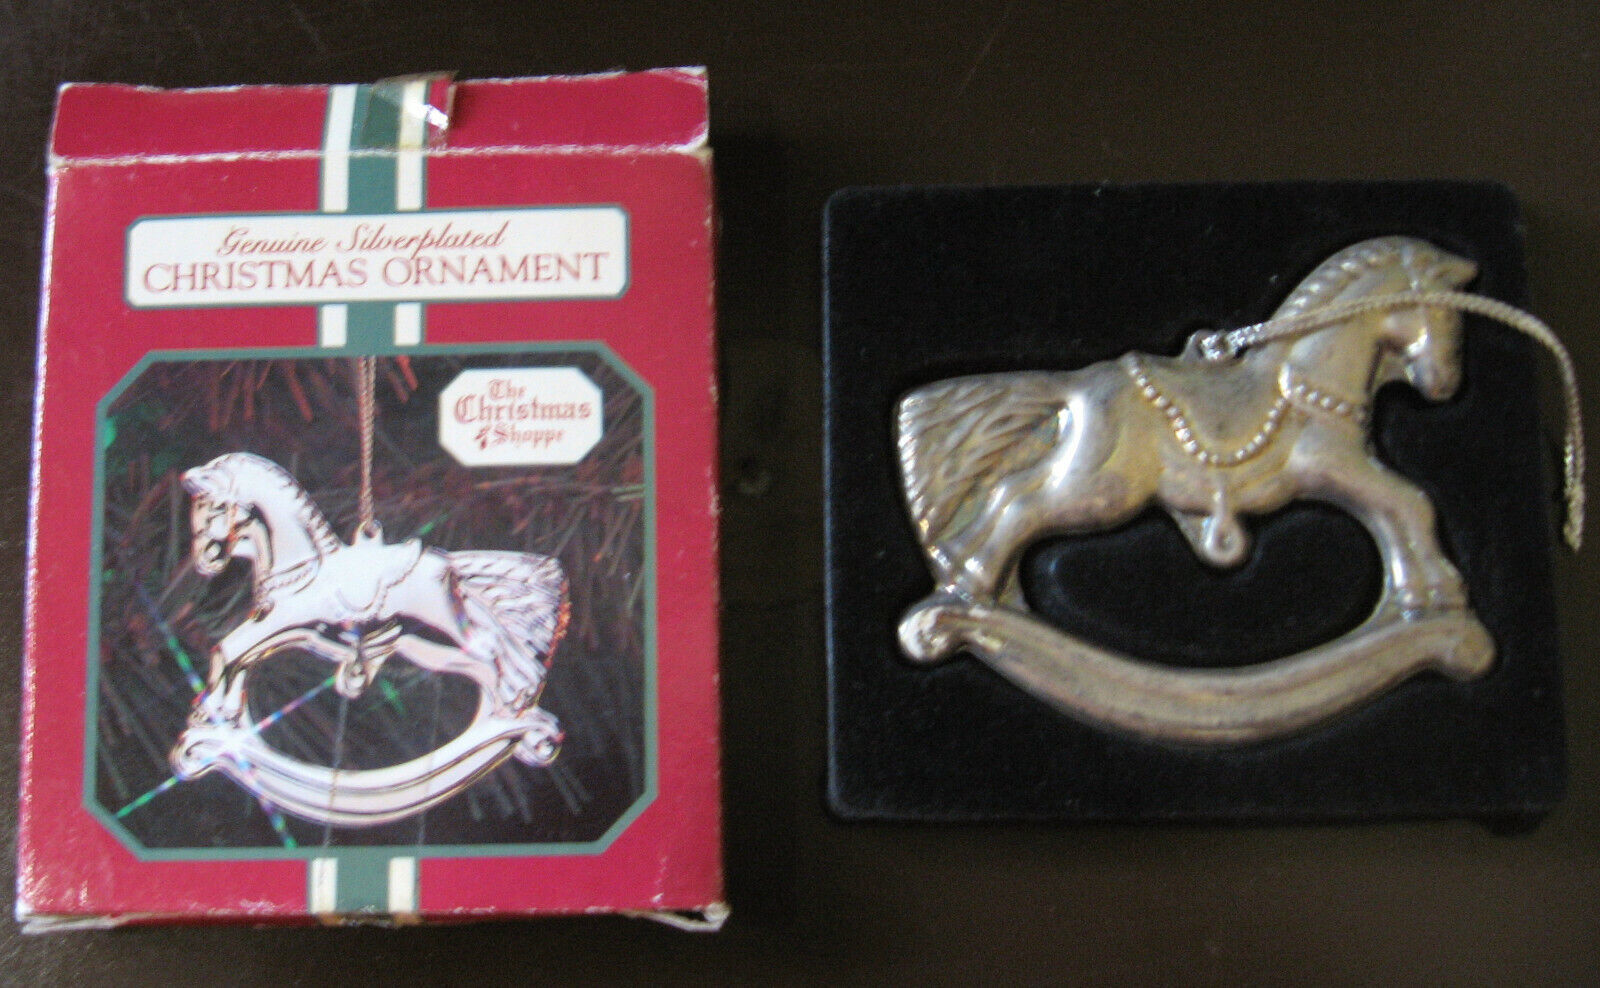 Primary image for Rocking Horse Silver Plated Christmas Ornament made by The Christmas Shoppe